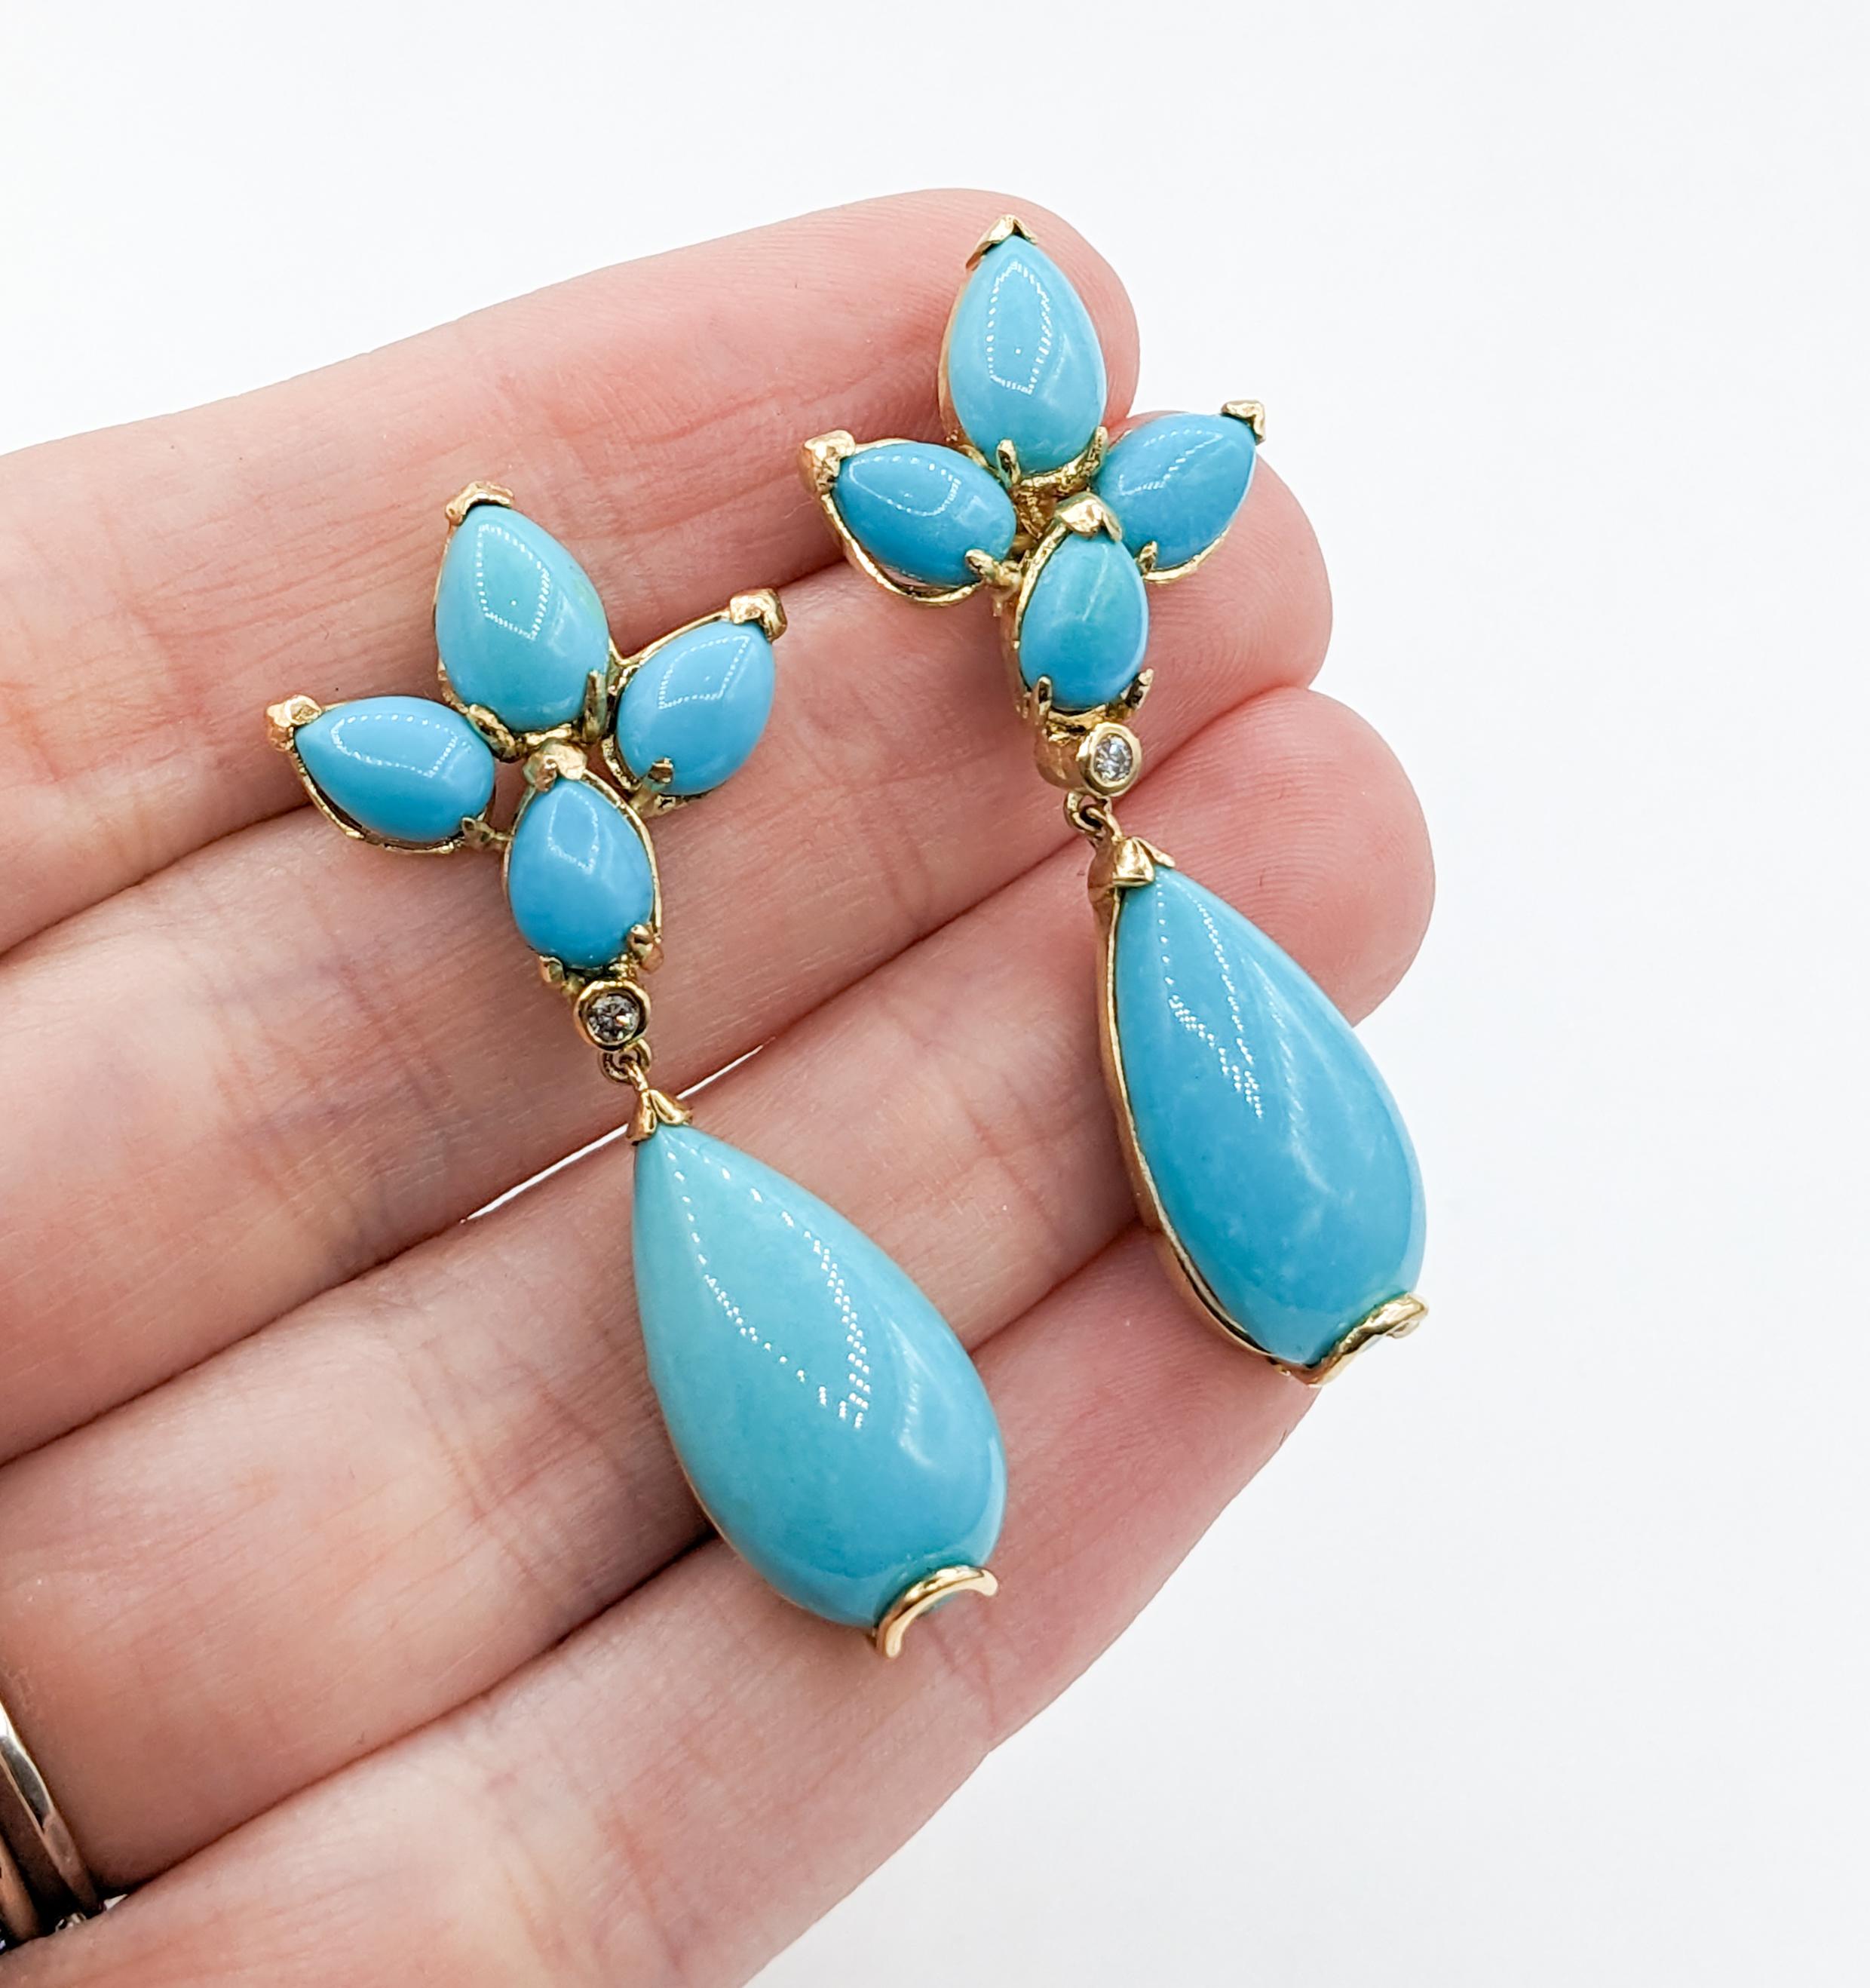 Turquoise & Diamond Statement Earrings in Gold

Introducing these stunning turquoise statement earrings in 14 karat yellow gold, a true testament to beauty and craftsmanship. These fantastic earrings feature a touch of elegance, with 7.2 ctw of